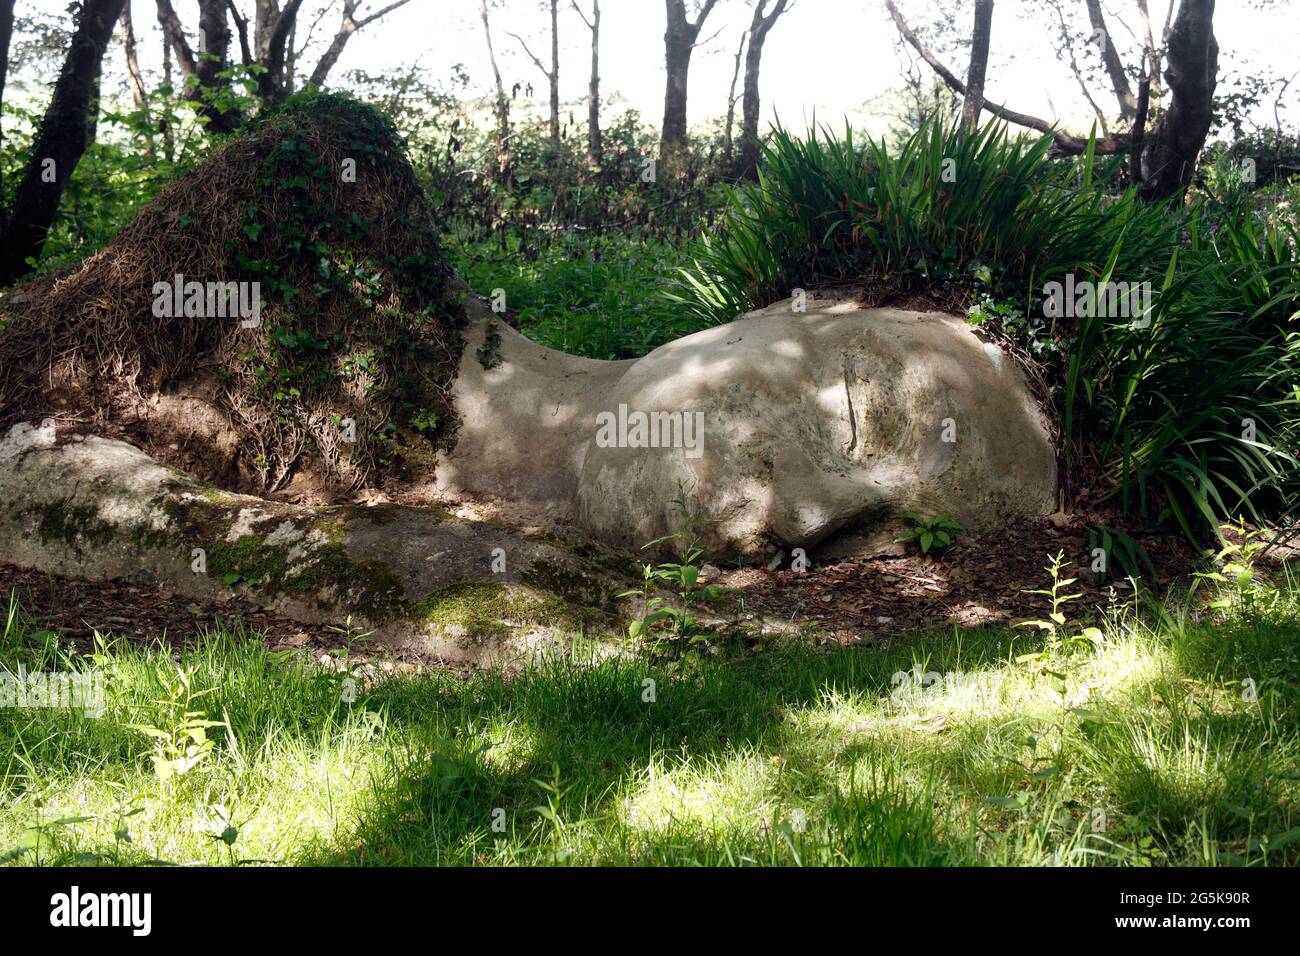 THE MUD MAID SCULPTURE. LOST GARDENS OF HELIGAN. CORNWALL UK. Stock Photo